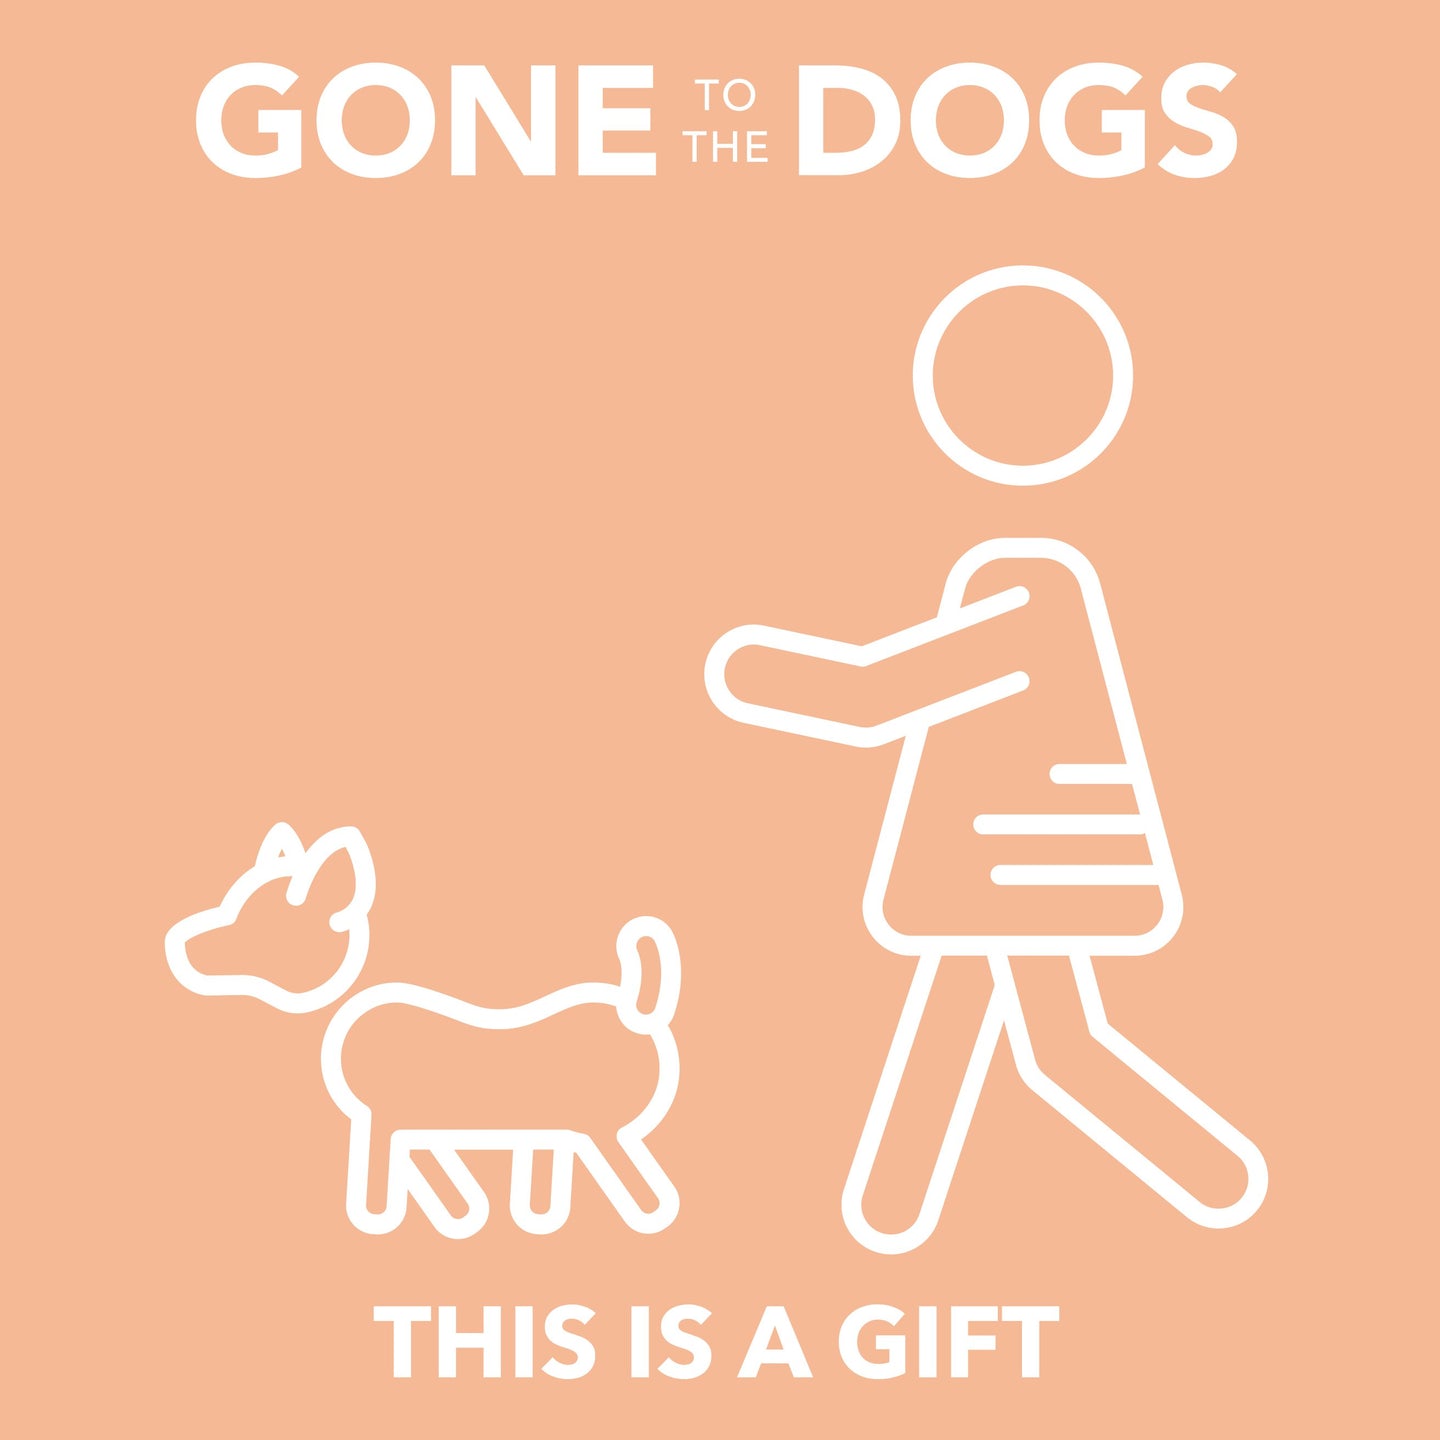 Gone to the Dogs - Digital Gift Cards